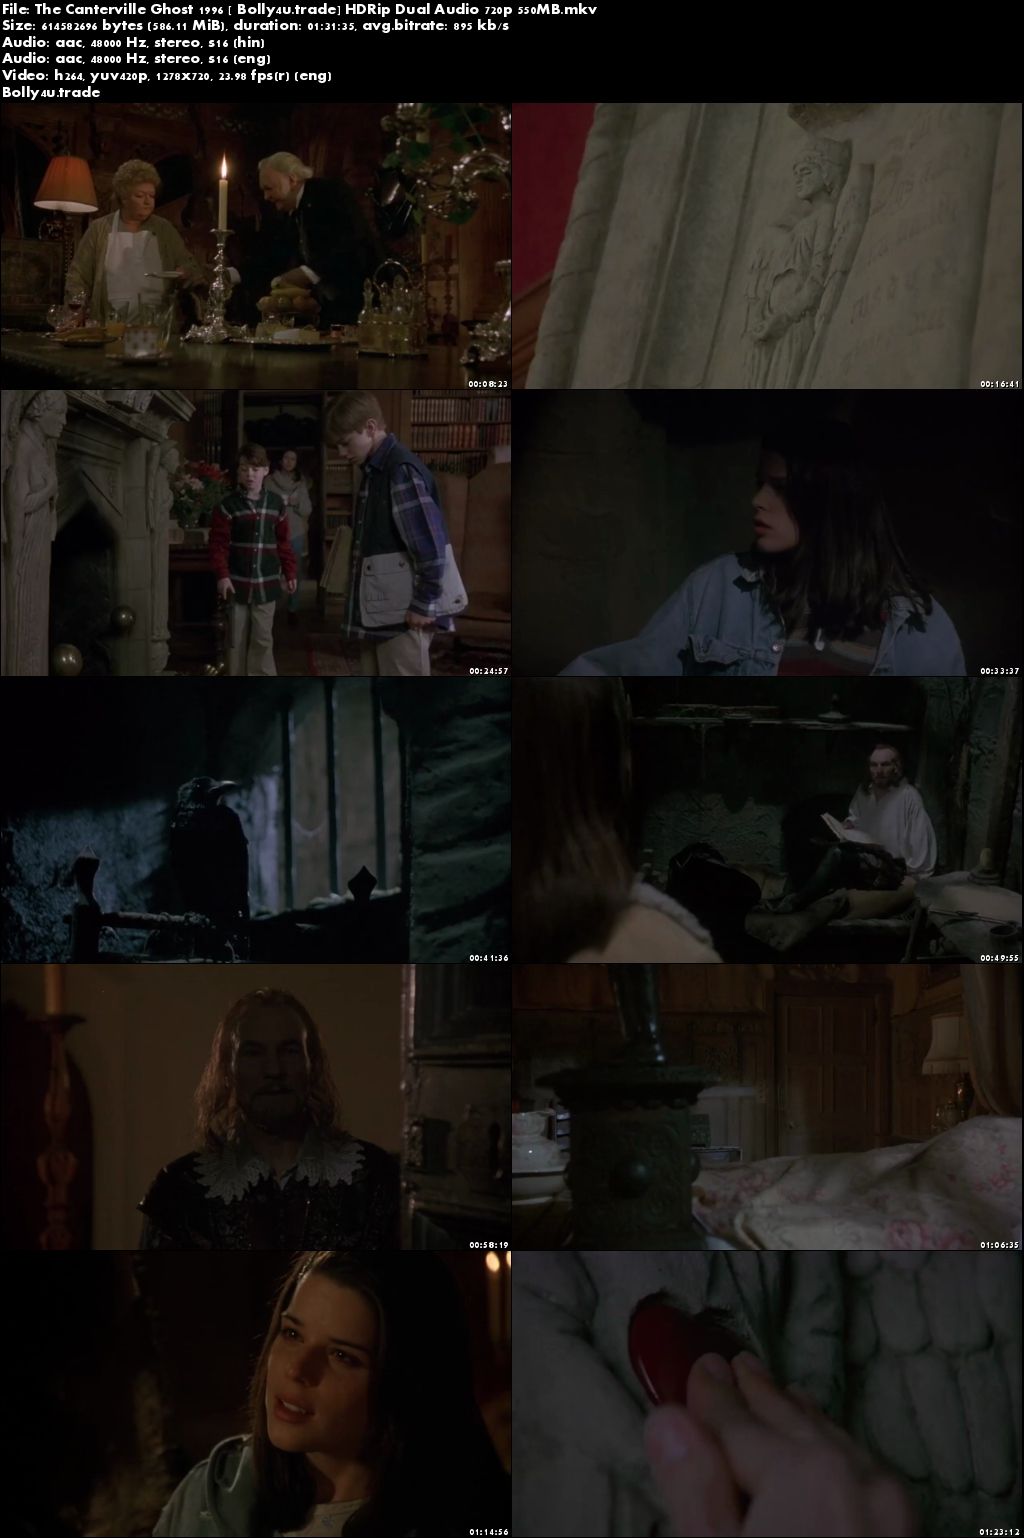 The Canterville Ghost 1996 HDRip 550Mb Hindi Dual Audio 720p Download